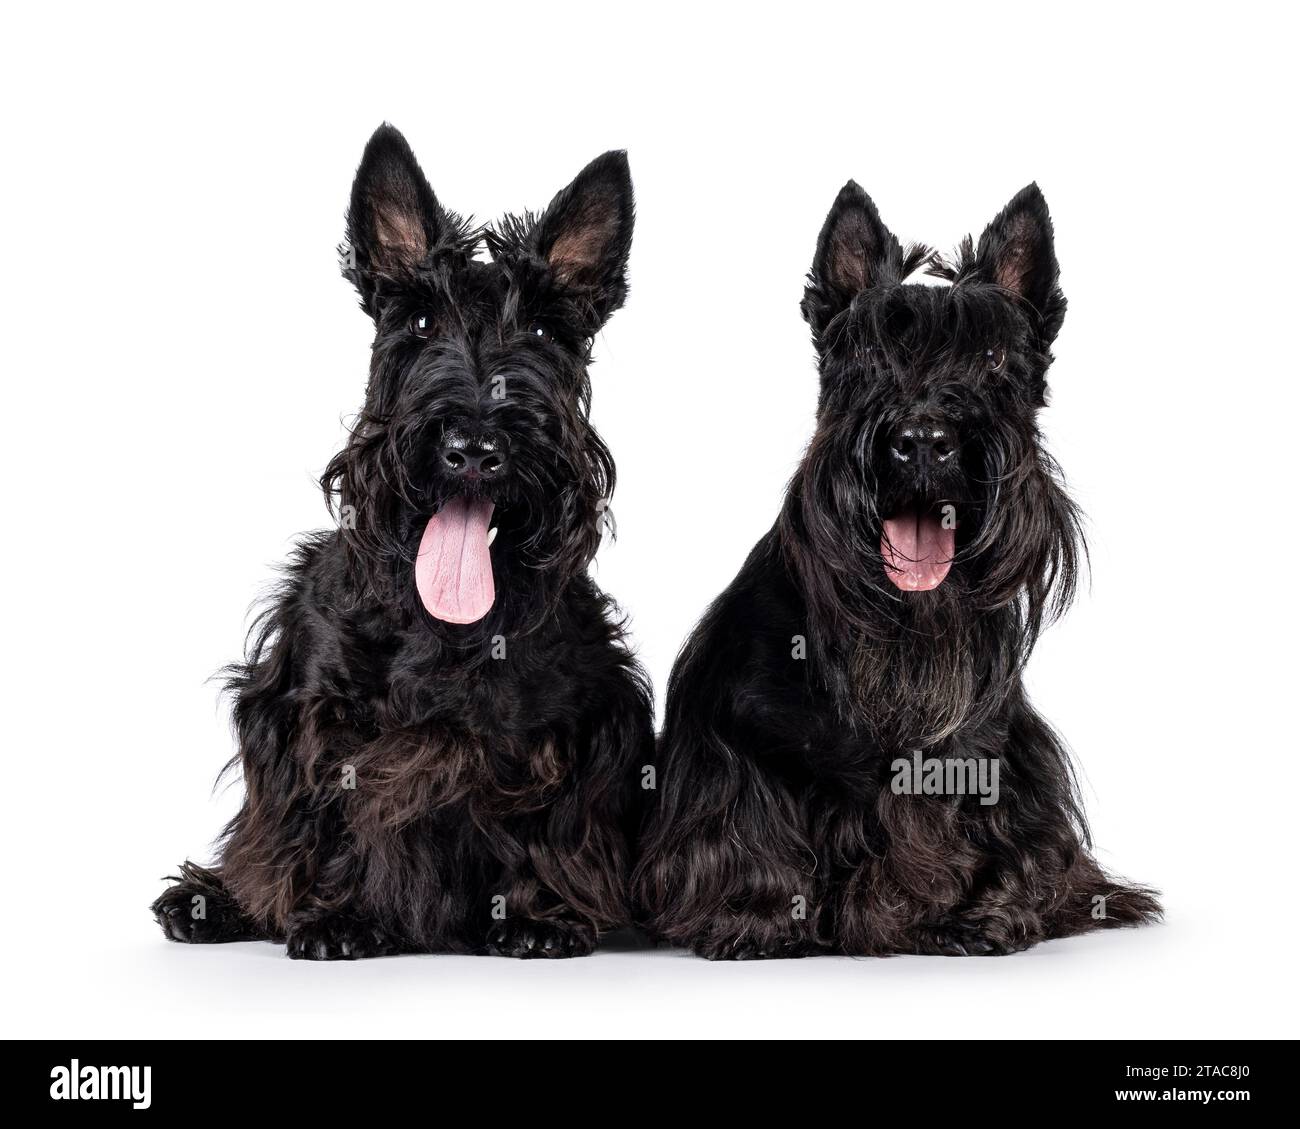 Two Scottish Terrier dogs, sitting beside each other facing front. Looking towards camera. Isolated on a white background. Stock Photo